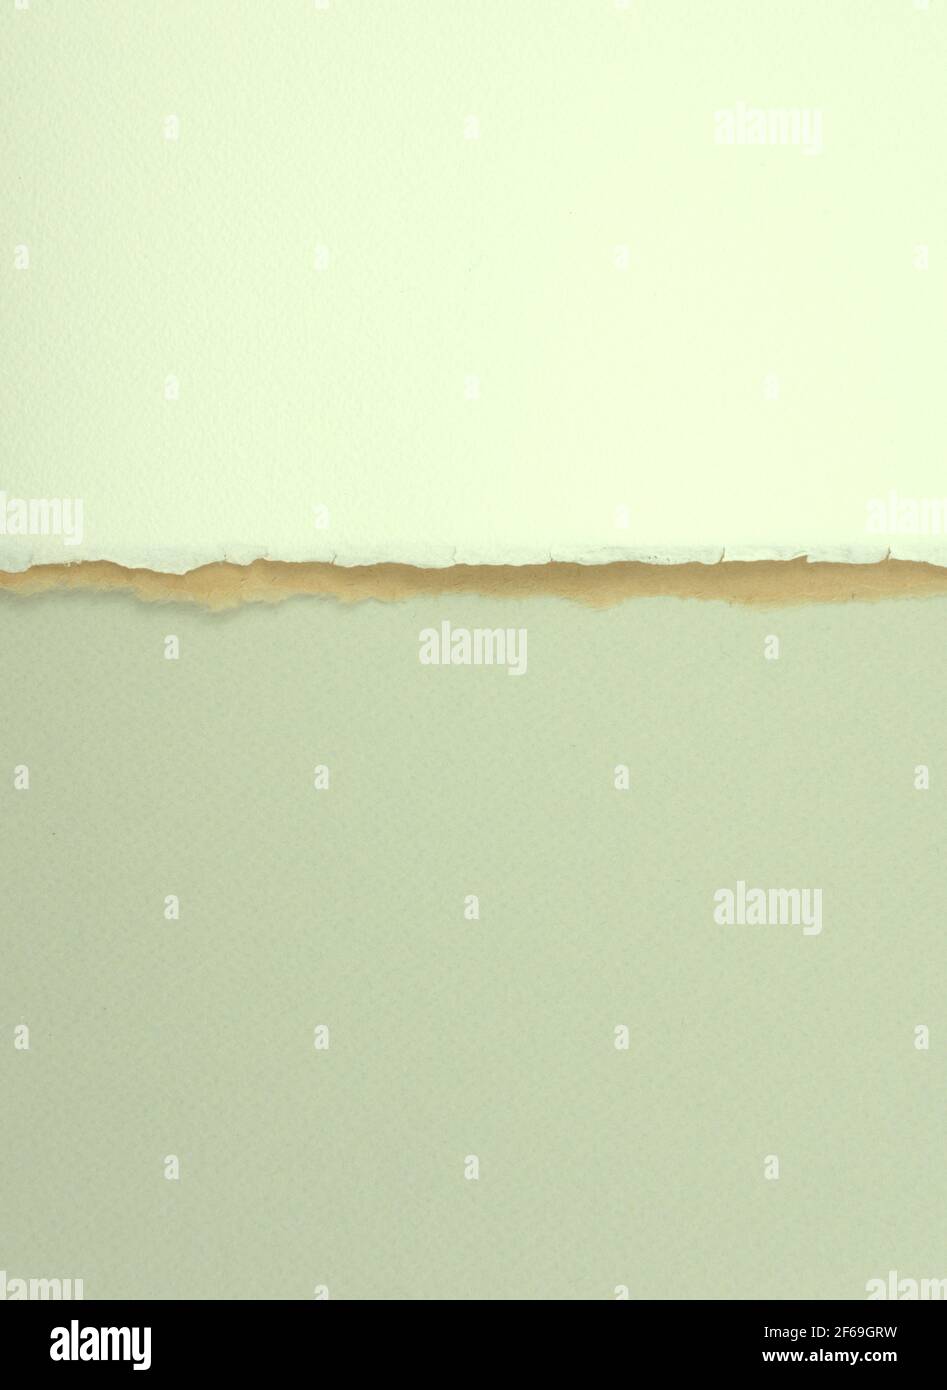 Titanium white, brown, pastel gray matte paper with unique torn of the side overlapping. Beautiful handmade cotton paper texture abstract background. Stock Photo